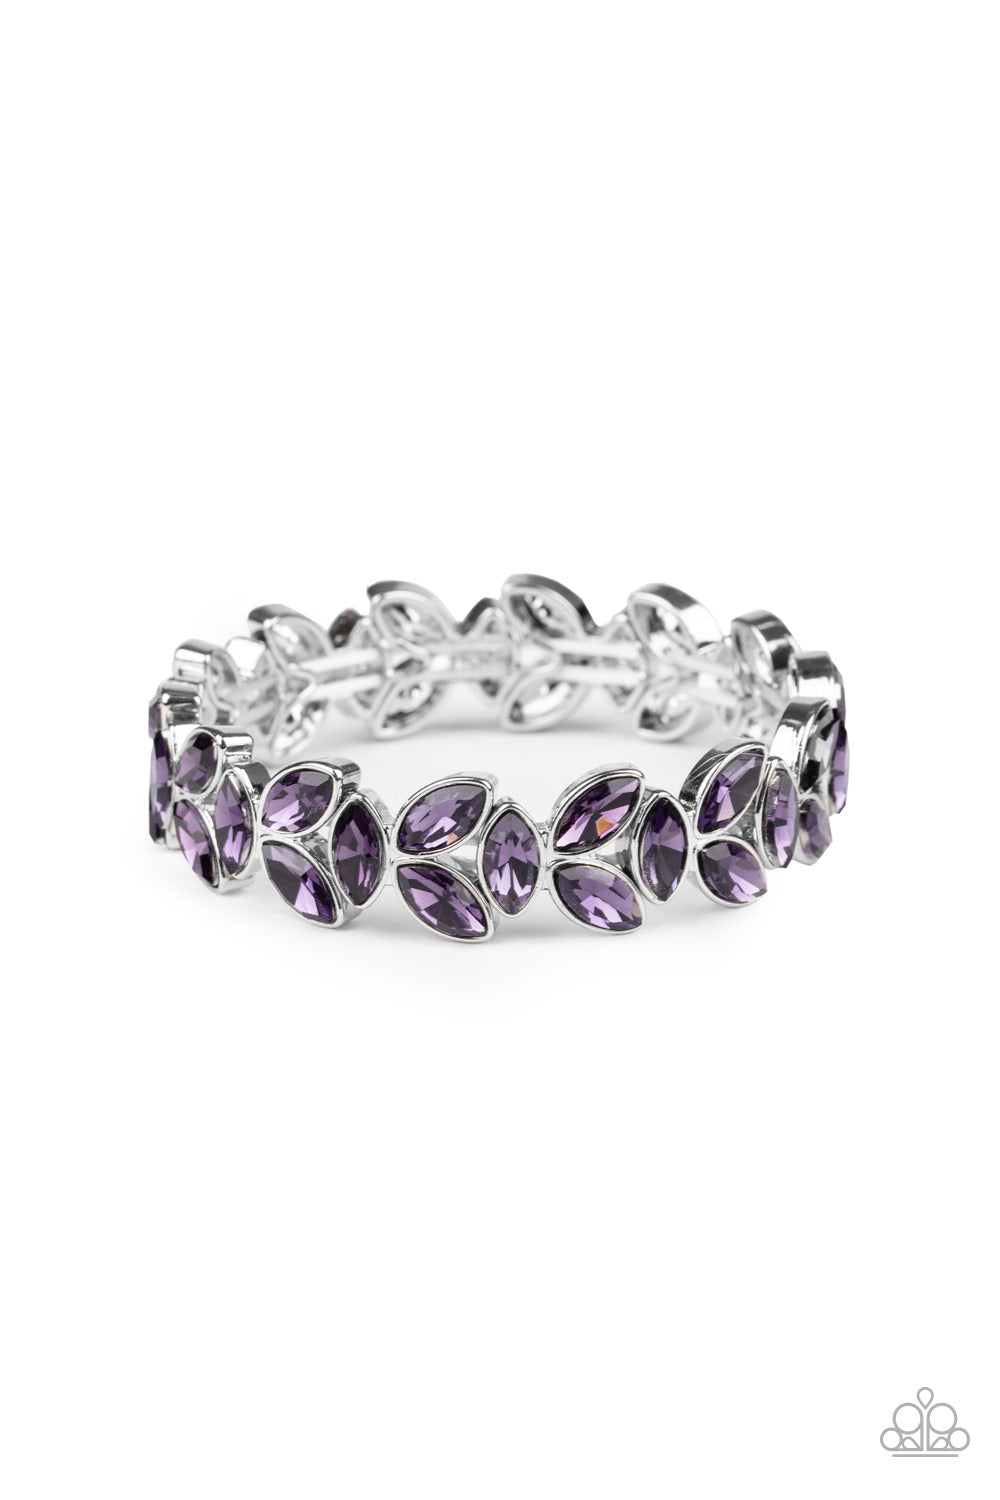 Trios of elegant marquise purple rhinestones delicately join into leafy silver frames along a stretchy band, creating a refined display around the wrist.